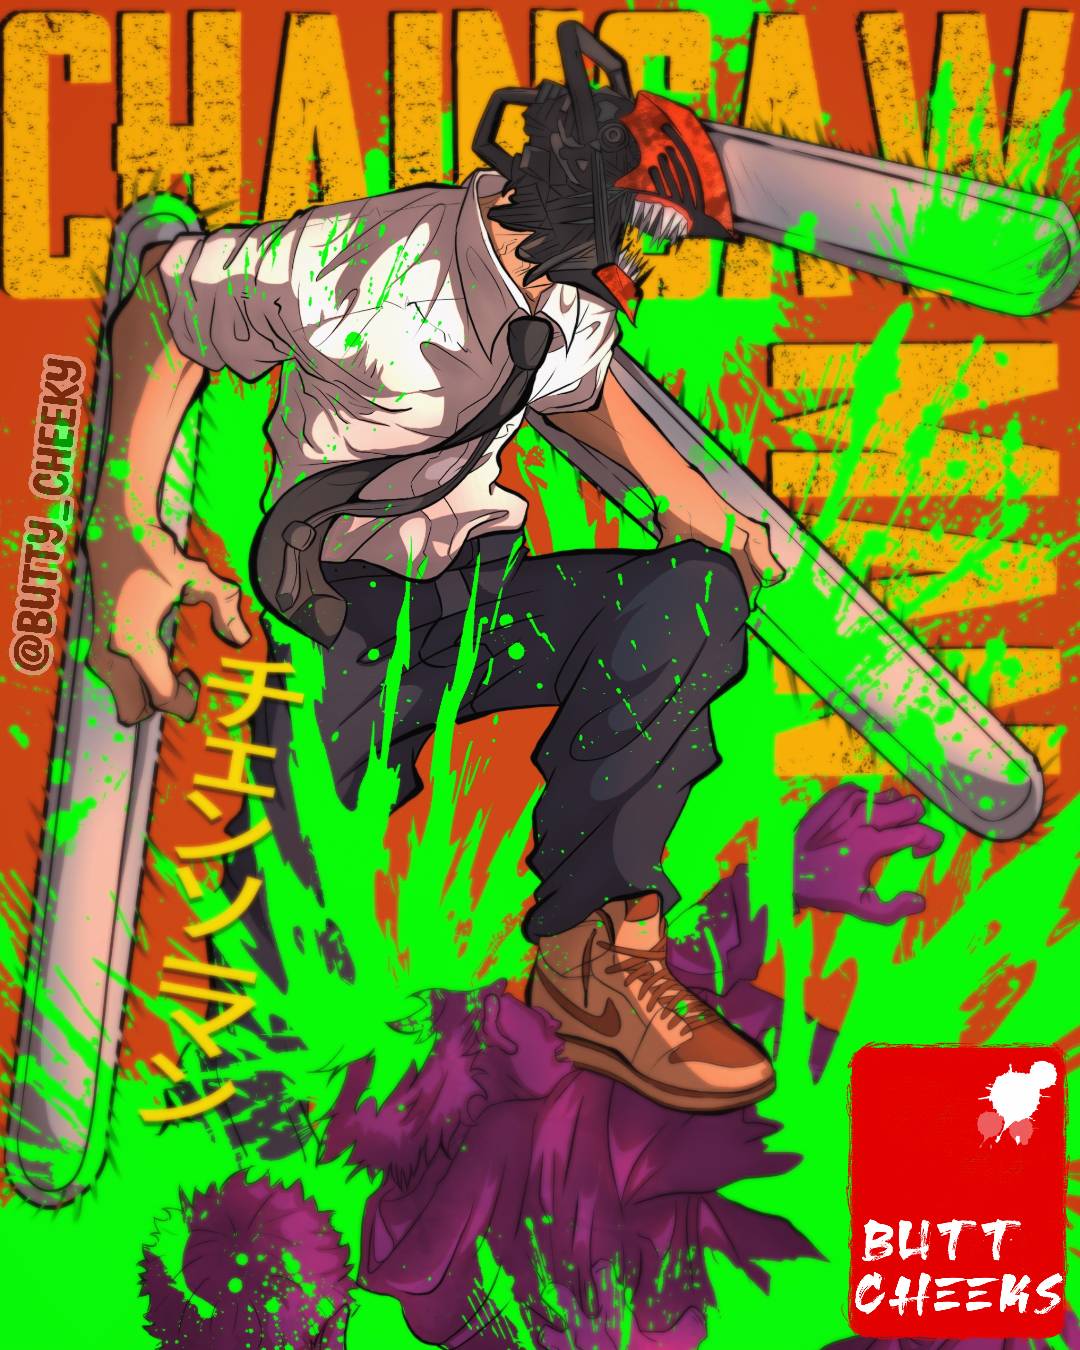 Chainsaw man Shonen jump cover page fanart by BUTT by buttycheeky on ...